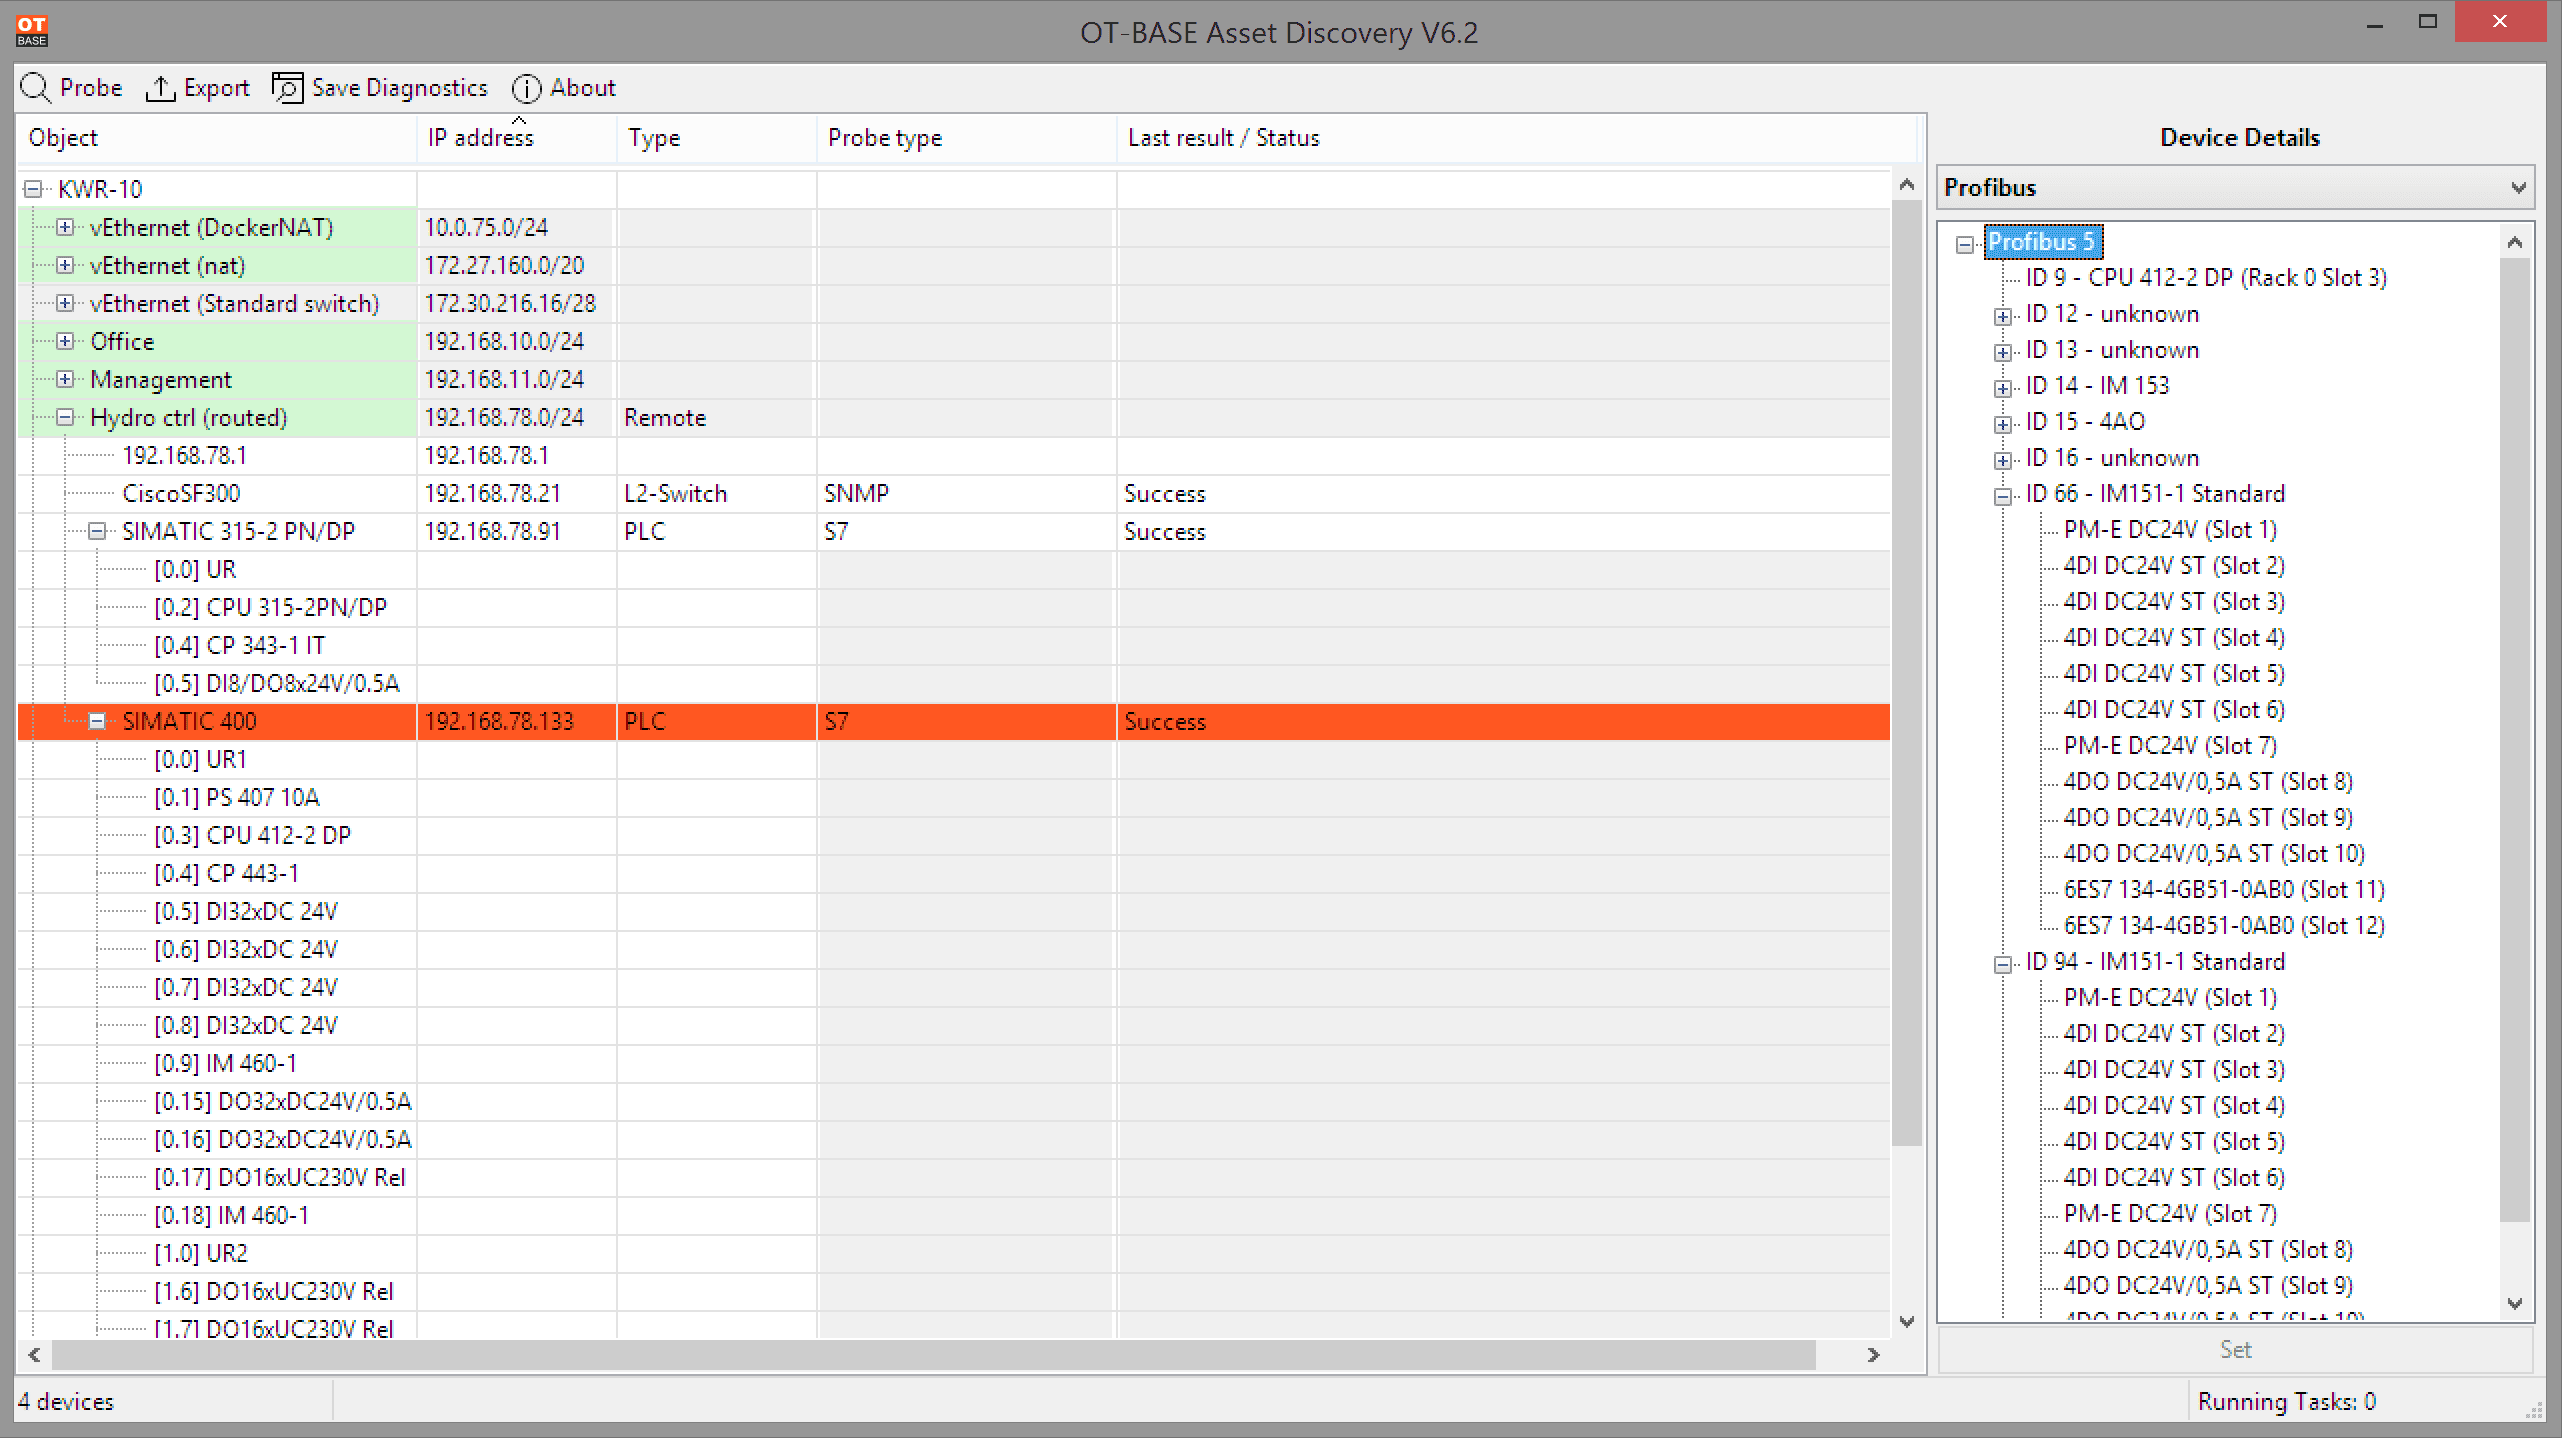 OT/ICS asset inventory in Excel